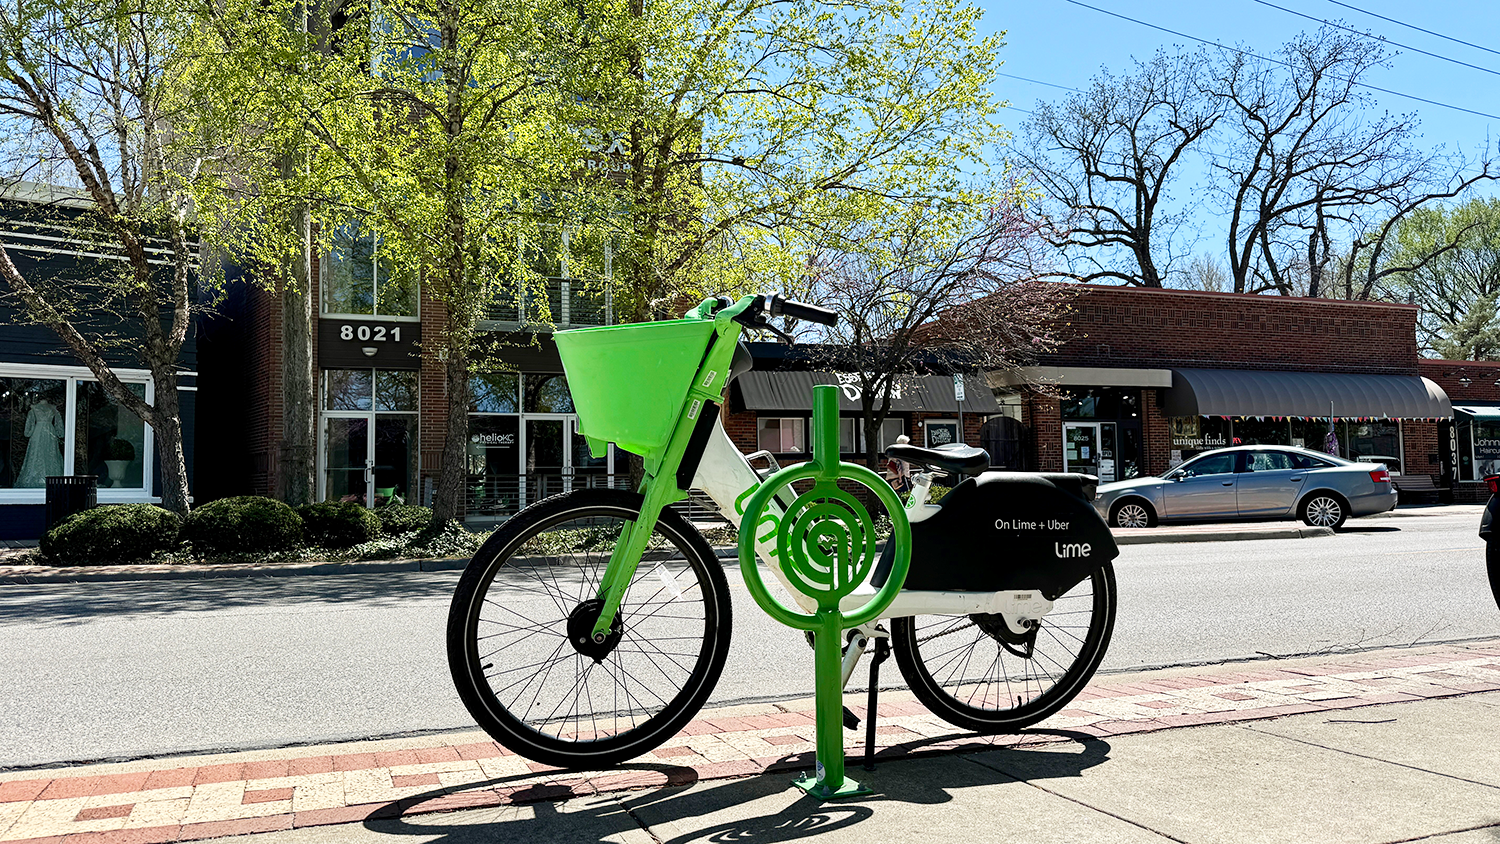 Lime electric bike barked next to a City of Overland Park bike stand in Downtown Overland Park.